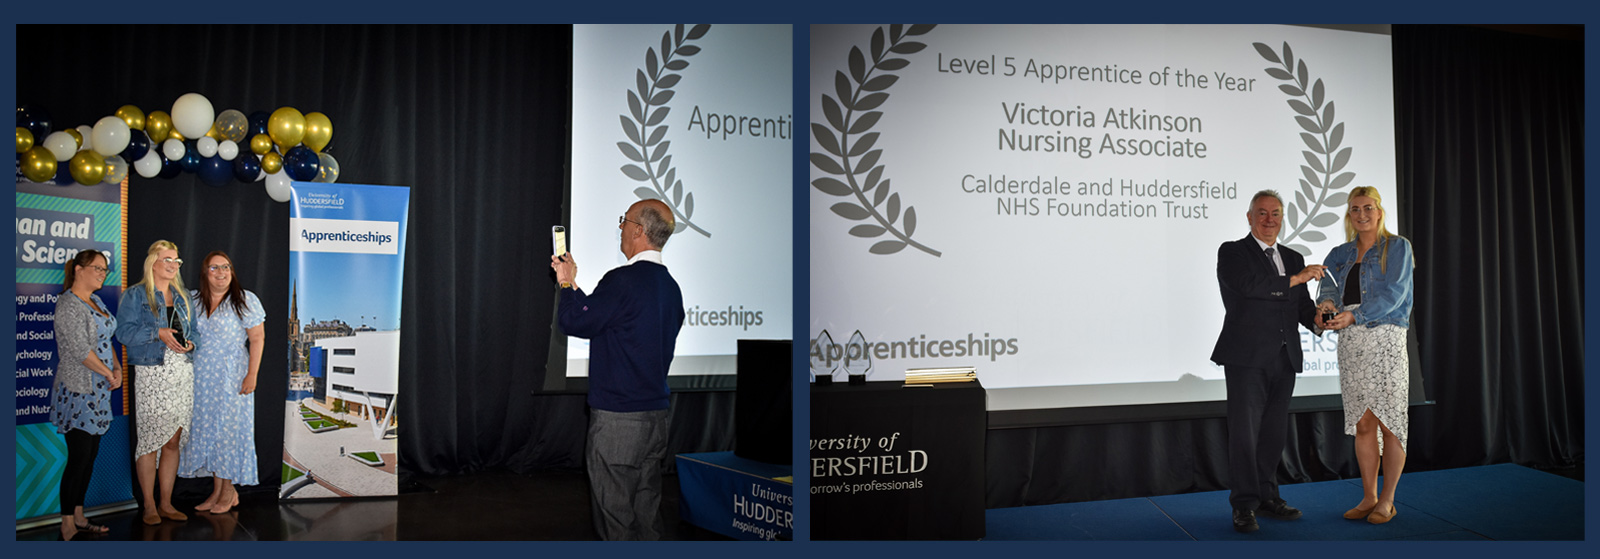 Victoria Atkinson won the award for Level 5 Apprentice of the Year